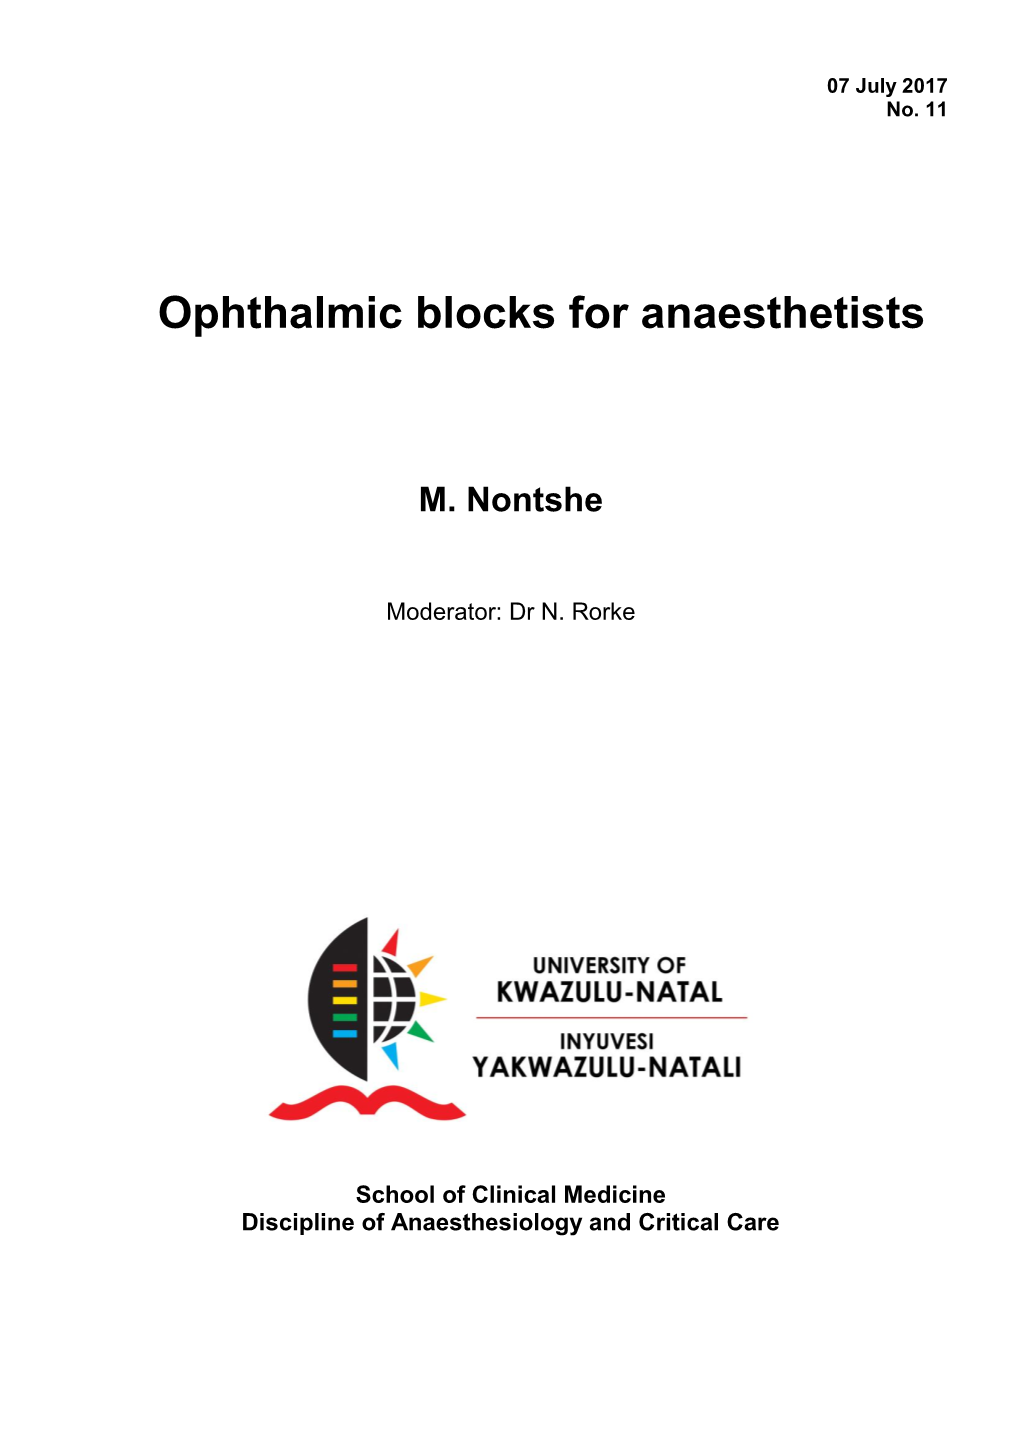 Ophthalmic Blocks for Anaesthetists